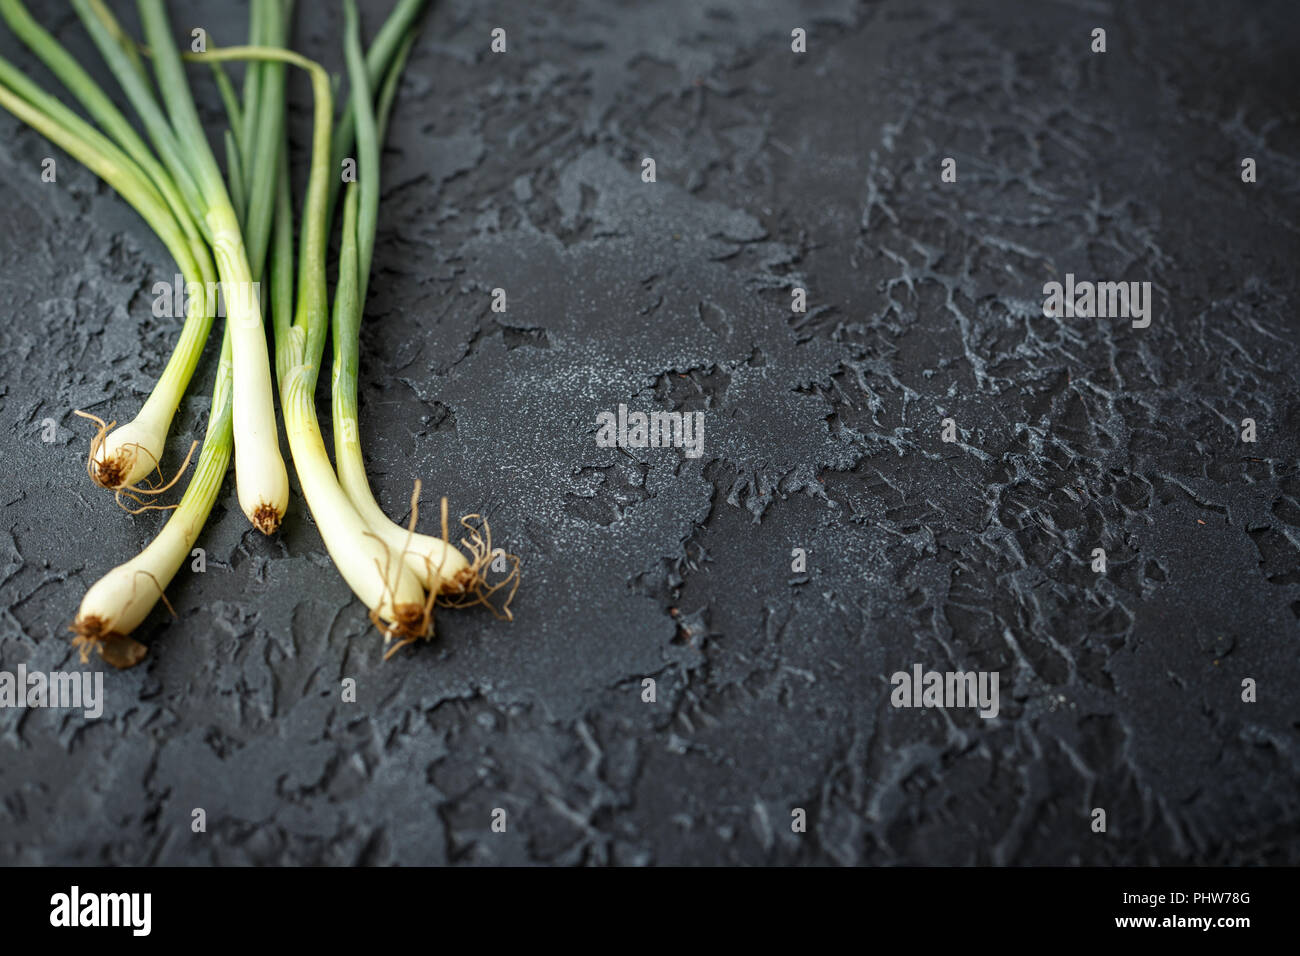 Spring green onions Stock Photo